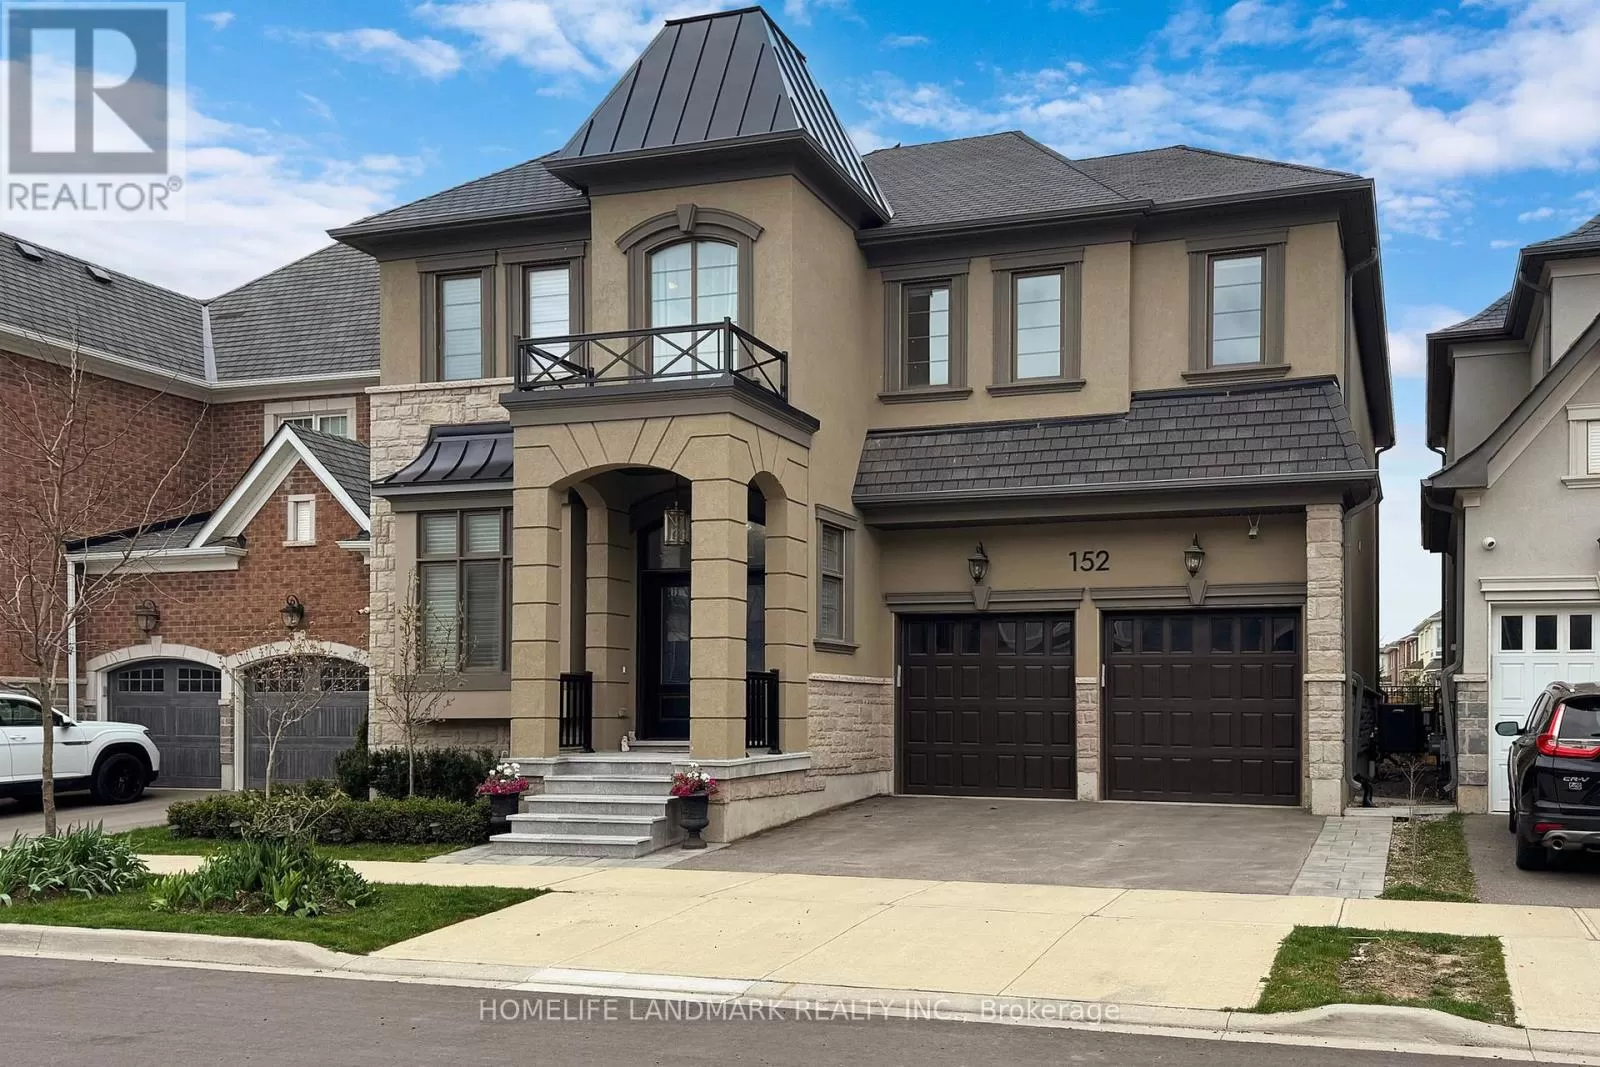 House for rent: 152 Bowbeer Rd, Oakville, Ontario L6H 0Y6